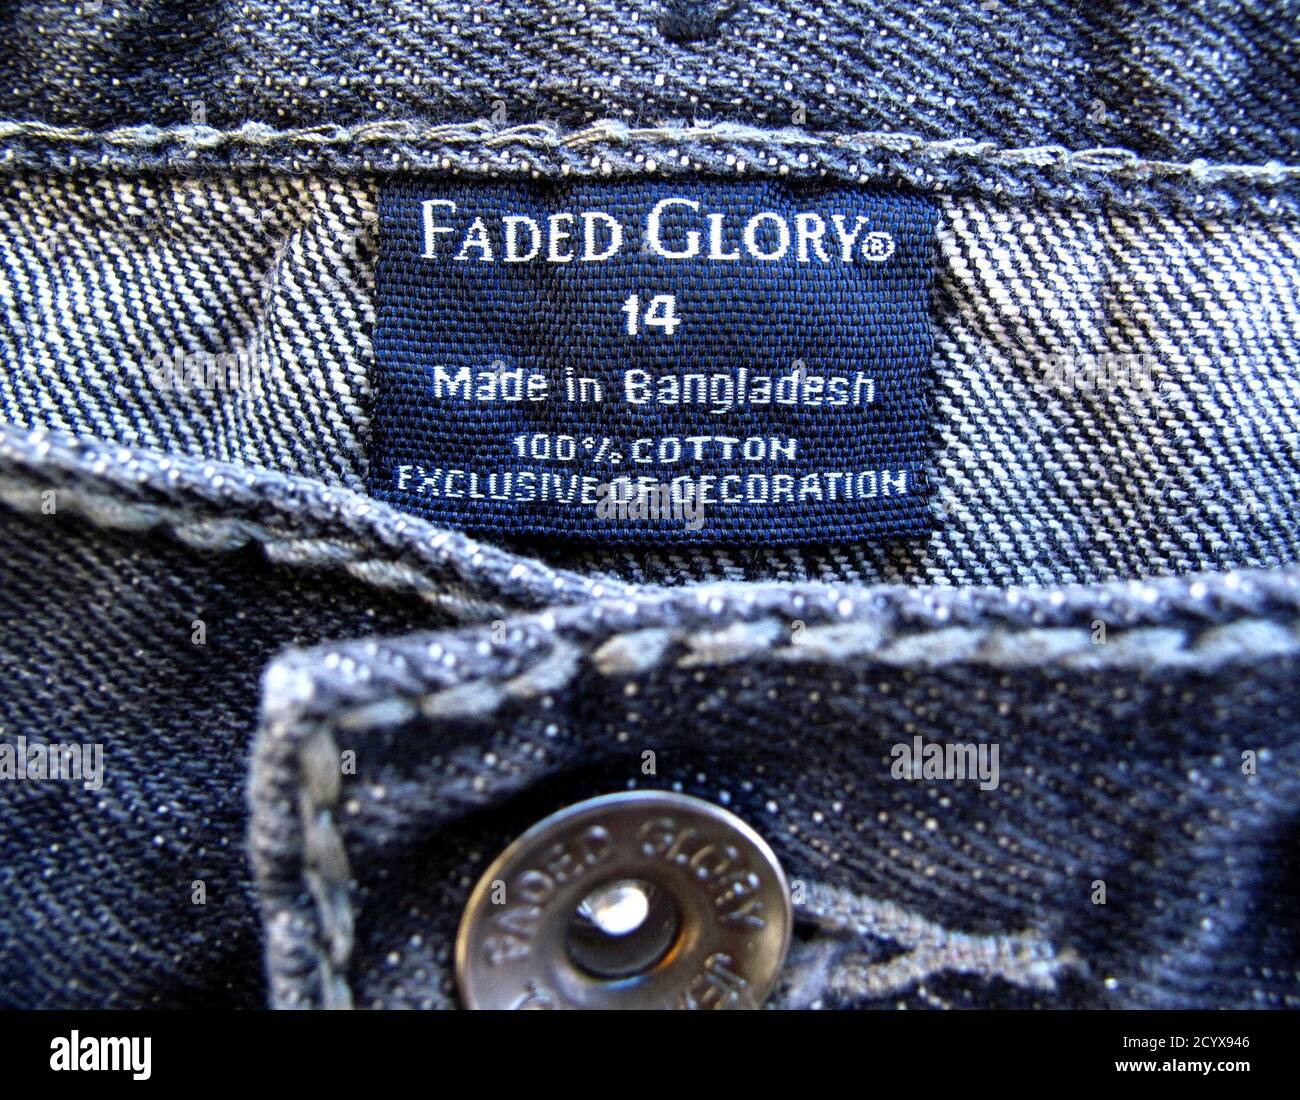 The clothing tag on a pair of jeans by ...